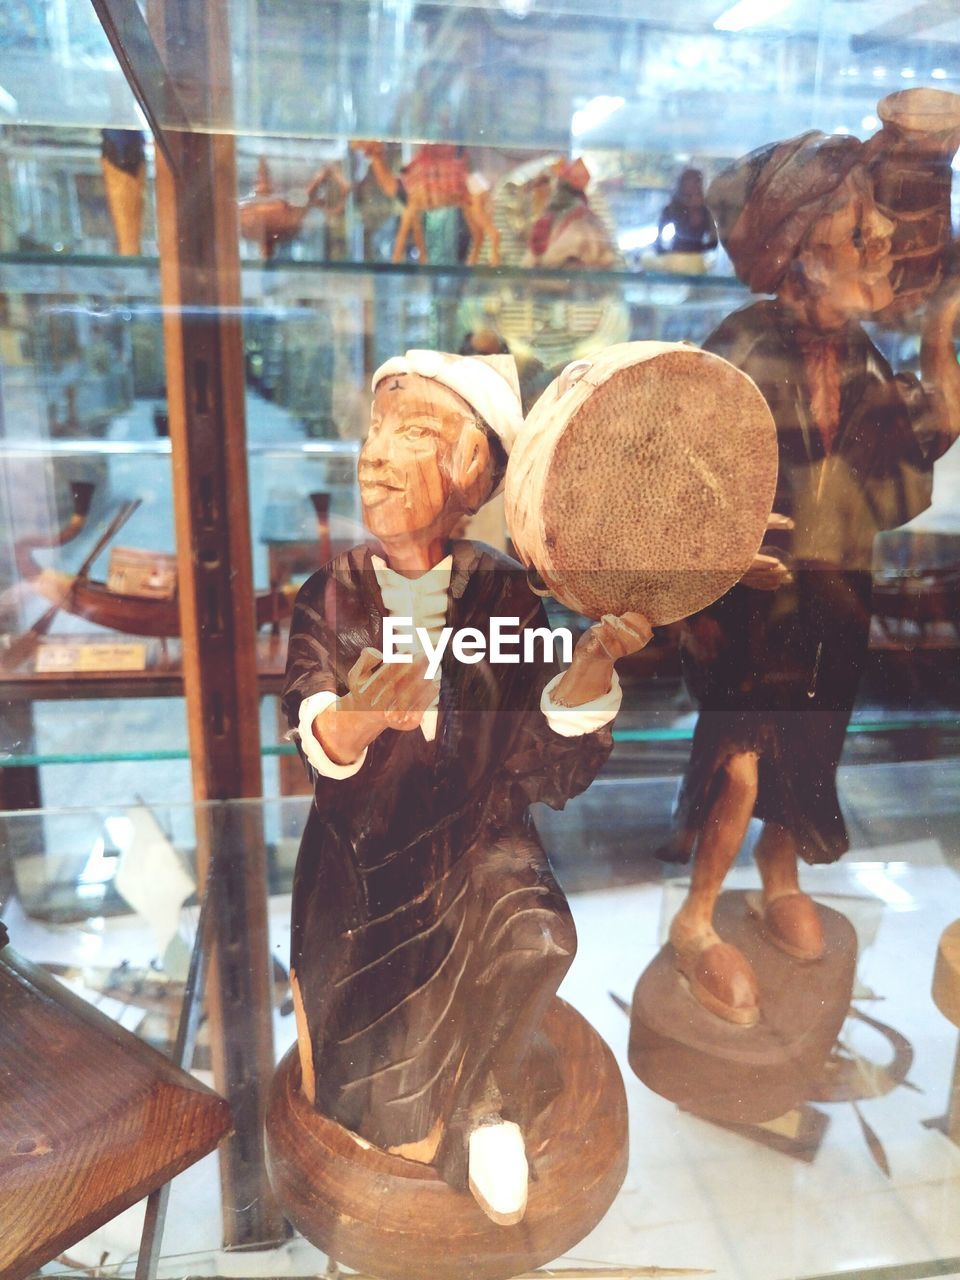 REFLECTION OF MAN IN GLASS WINDOW AT STORE